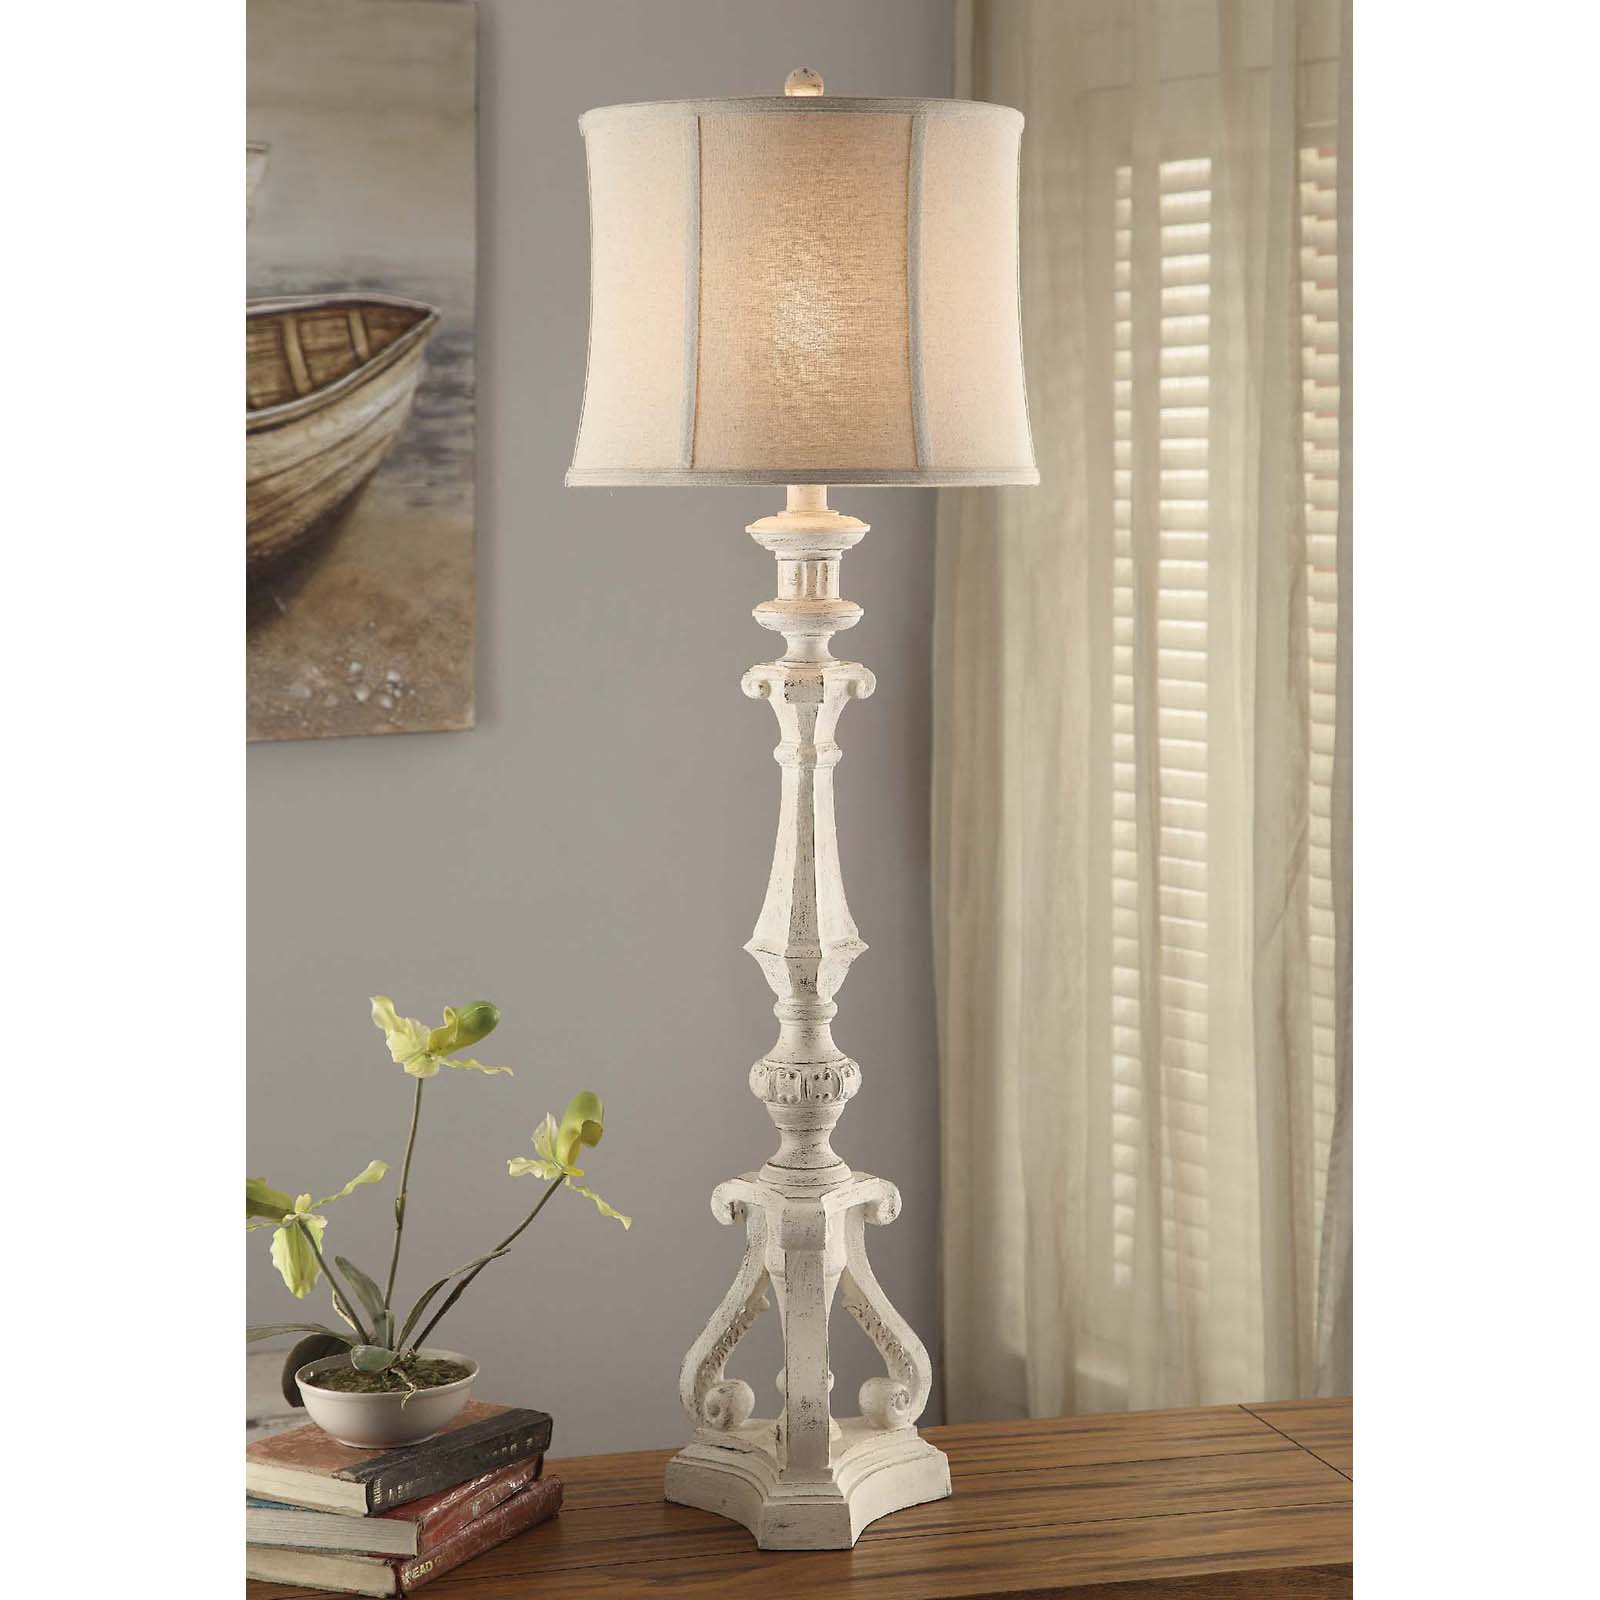 Crestview Collection Serenity Table Lamp In 2019 Buffet within dimensions 1600 X 1600